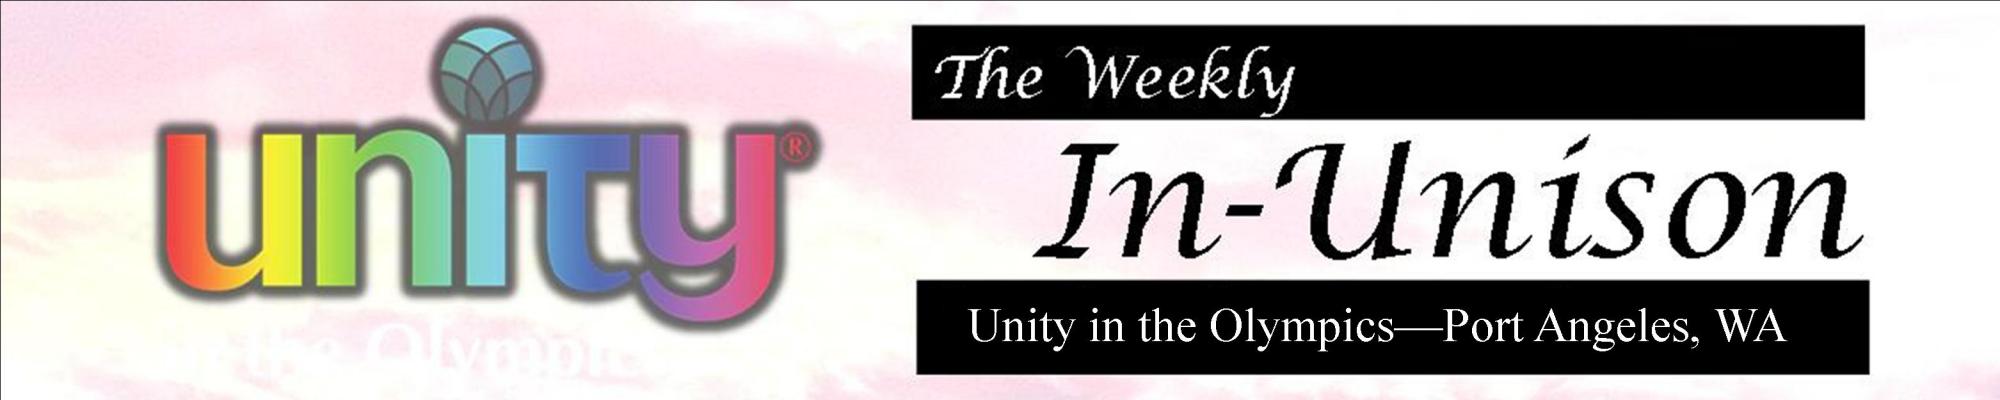 The Weekly IN-UNISOM January 10th Edition